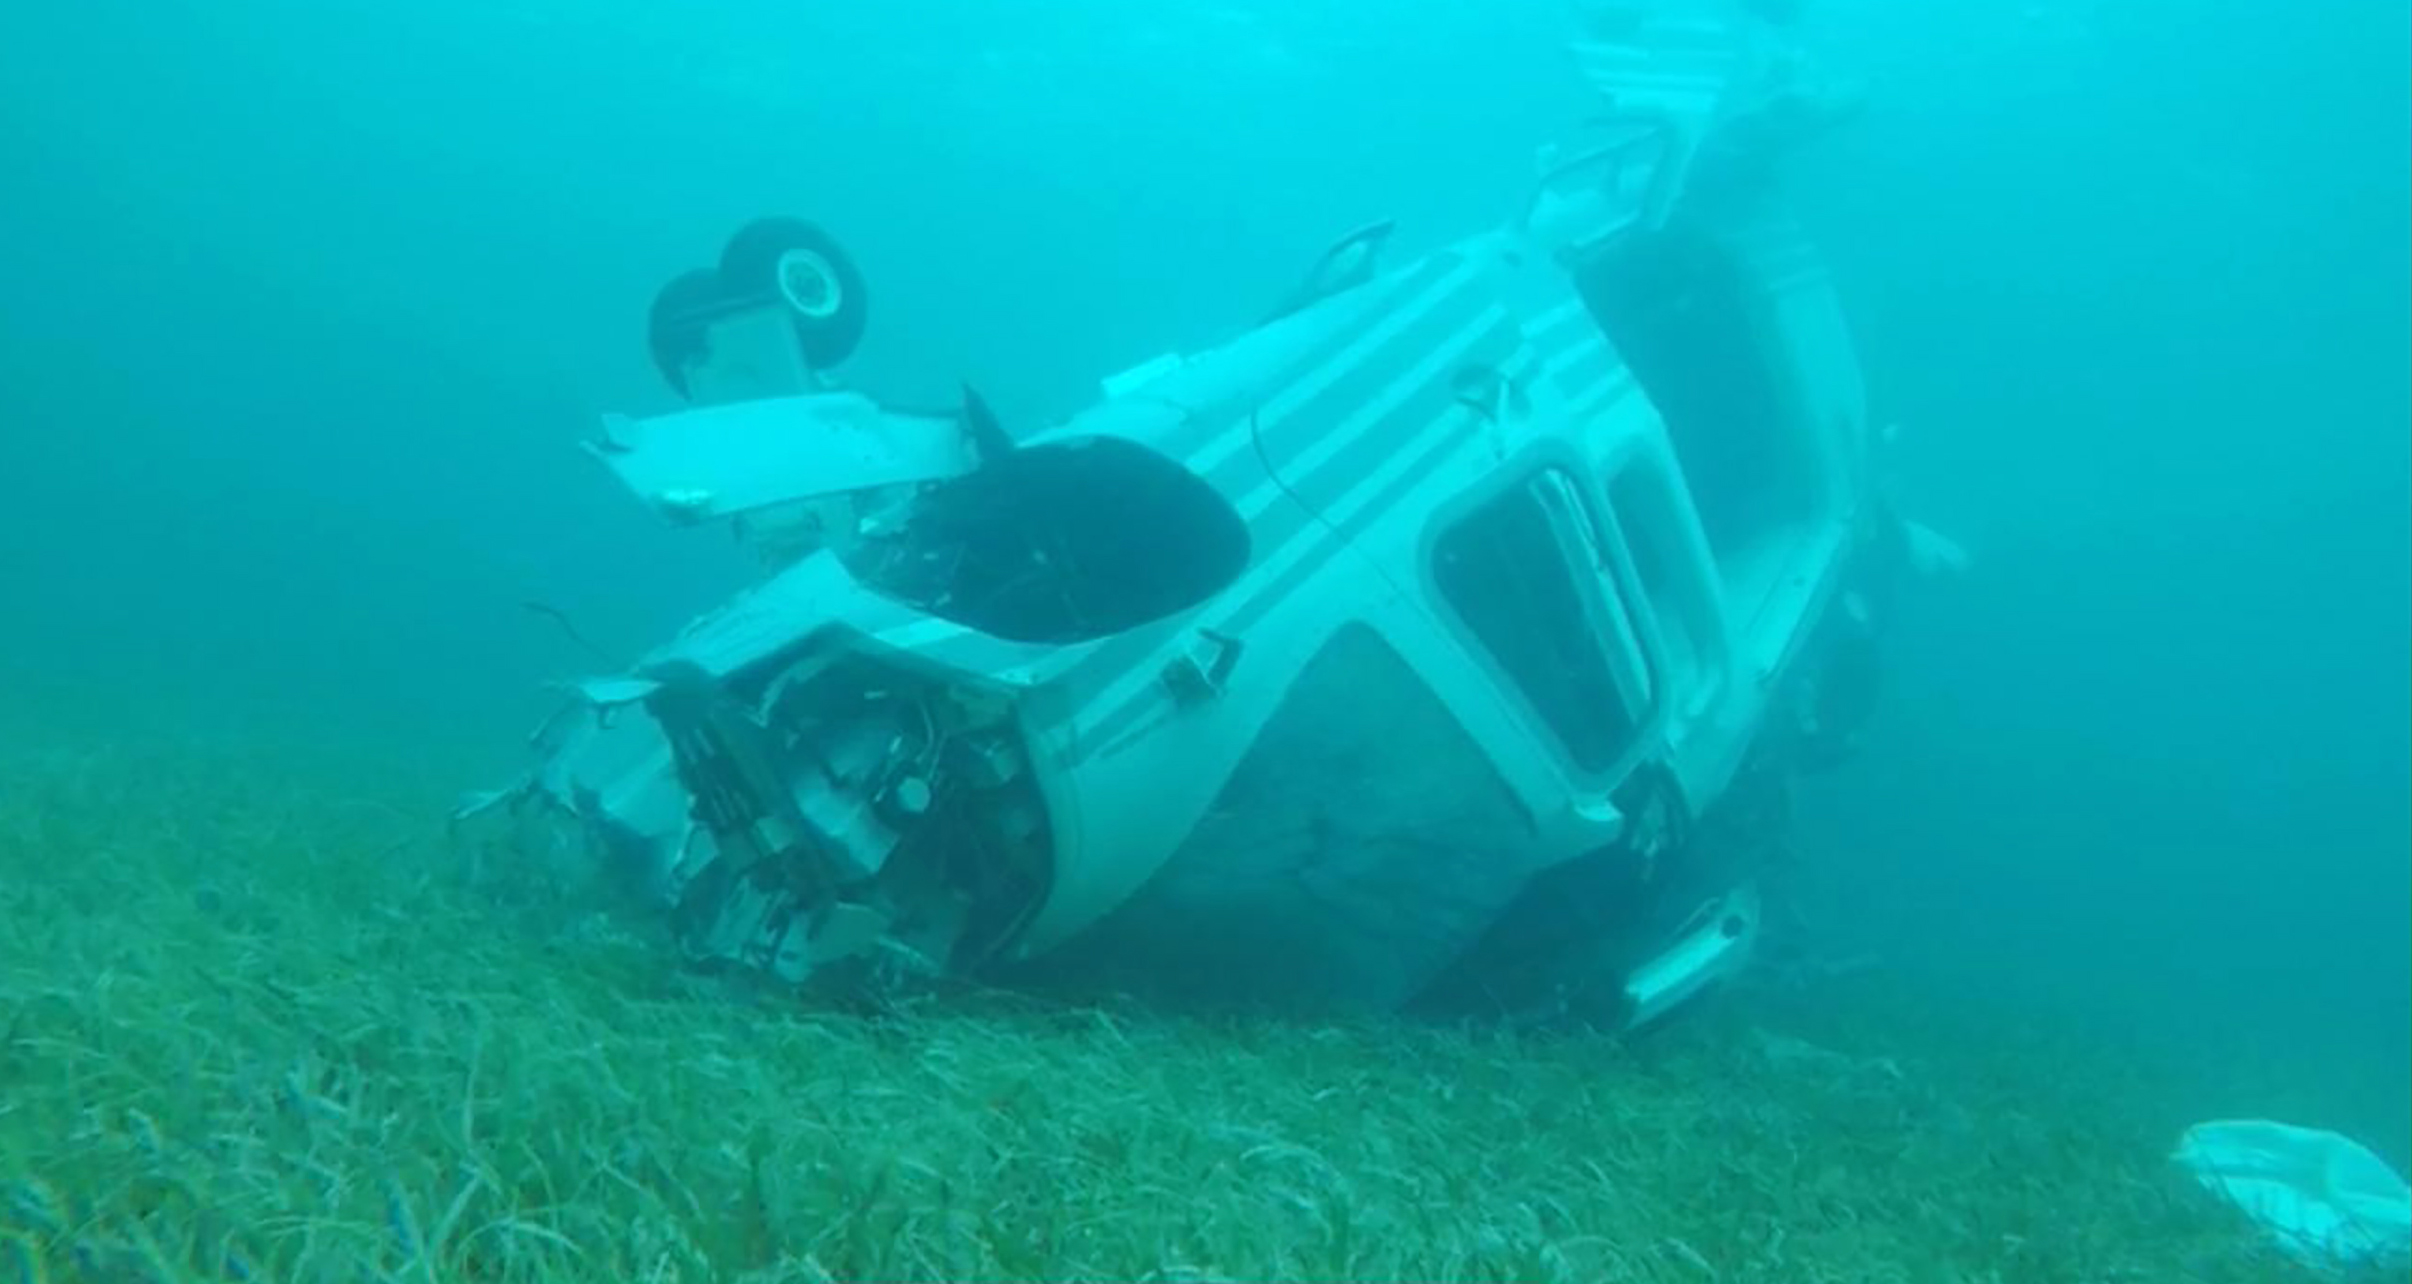 PHOTO: Investigators conducted underwater surveying and mapped the debris field at the scene of a helicopter crash off Grand Cay, in the Bahamas, on July 5, 2019.